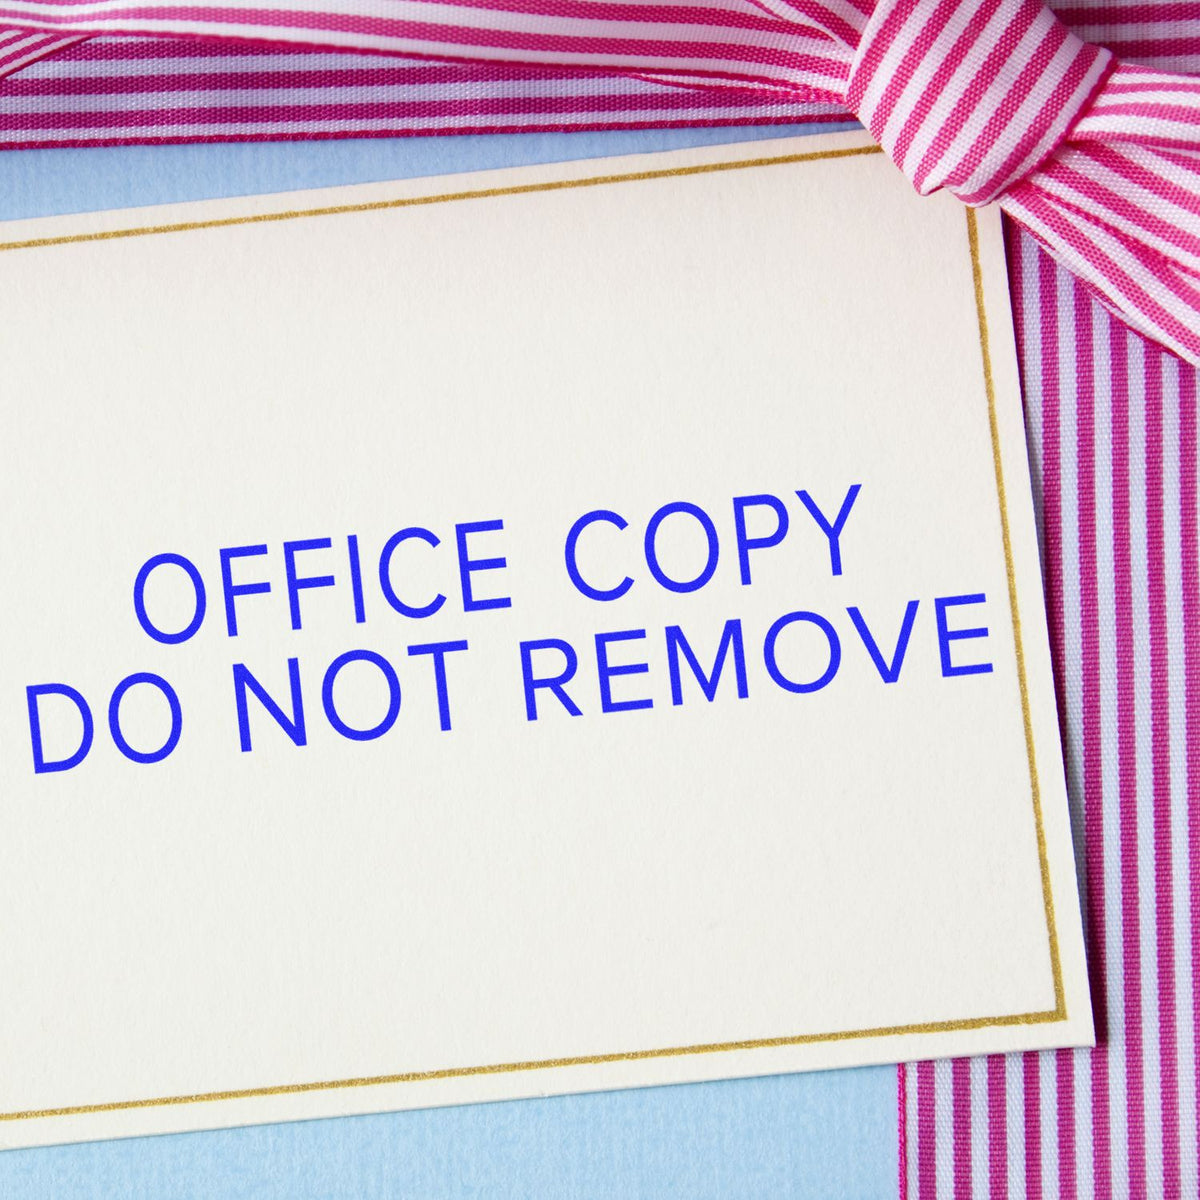 Narrow Font Office Copy Do Not Remove Rubber Stamp In Use Photo